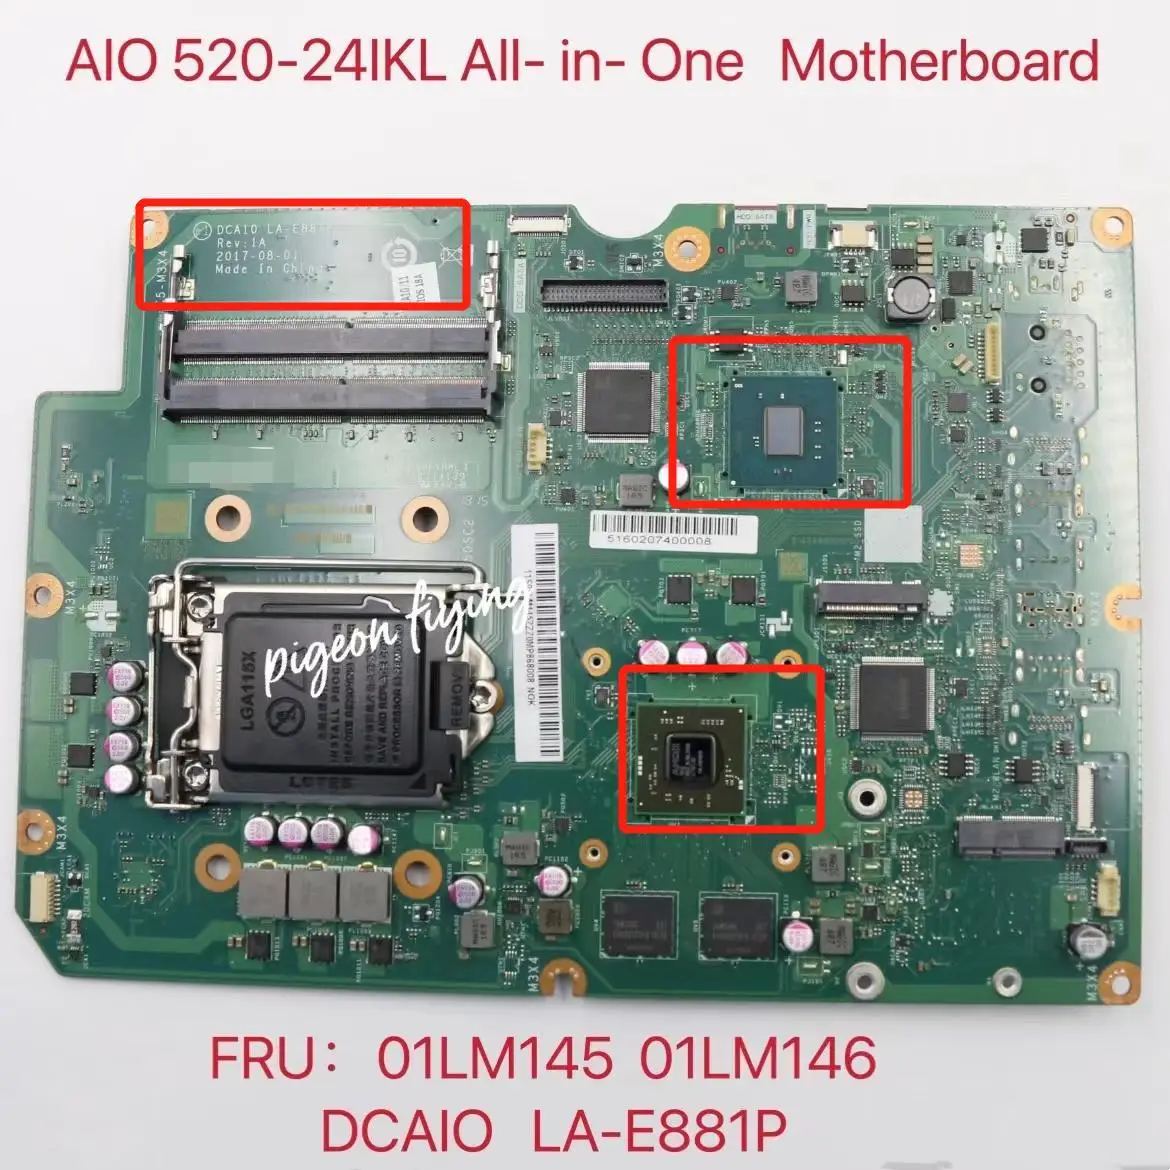 

For Lenovo AIO 520-24IKL All-in-One Motherboard Kaby Lake-S B250 R17M 2G Number LA-E881P FRU 01LM145 01LM146